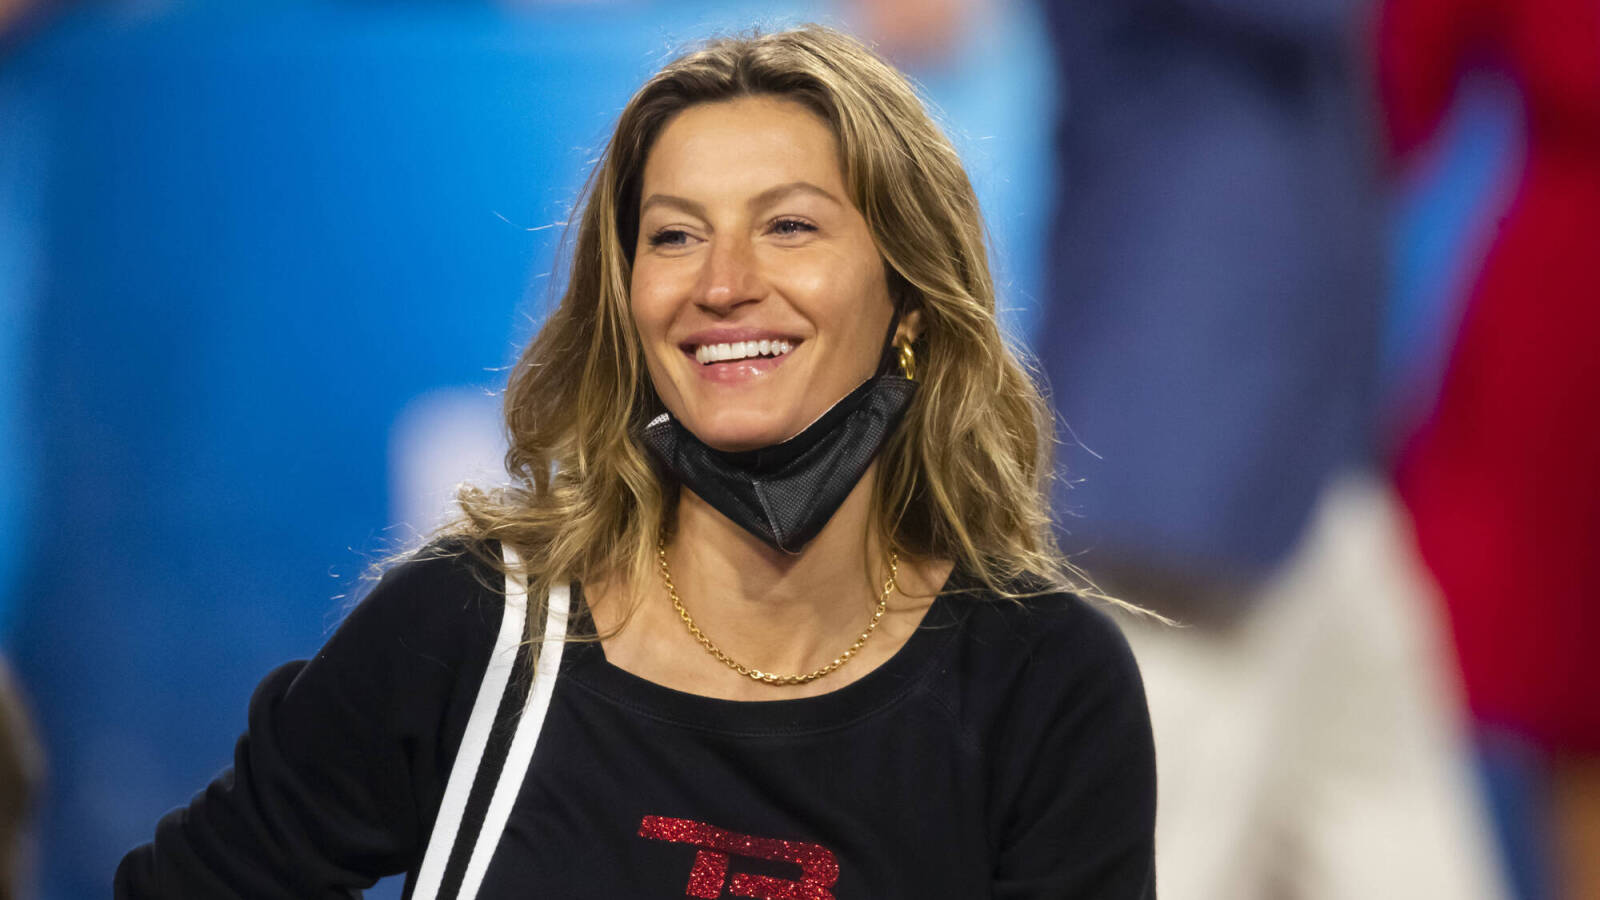 Gisele Bundchen reportedly had strong reaction to jokes at Tom Brady roast